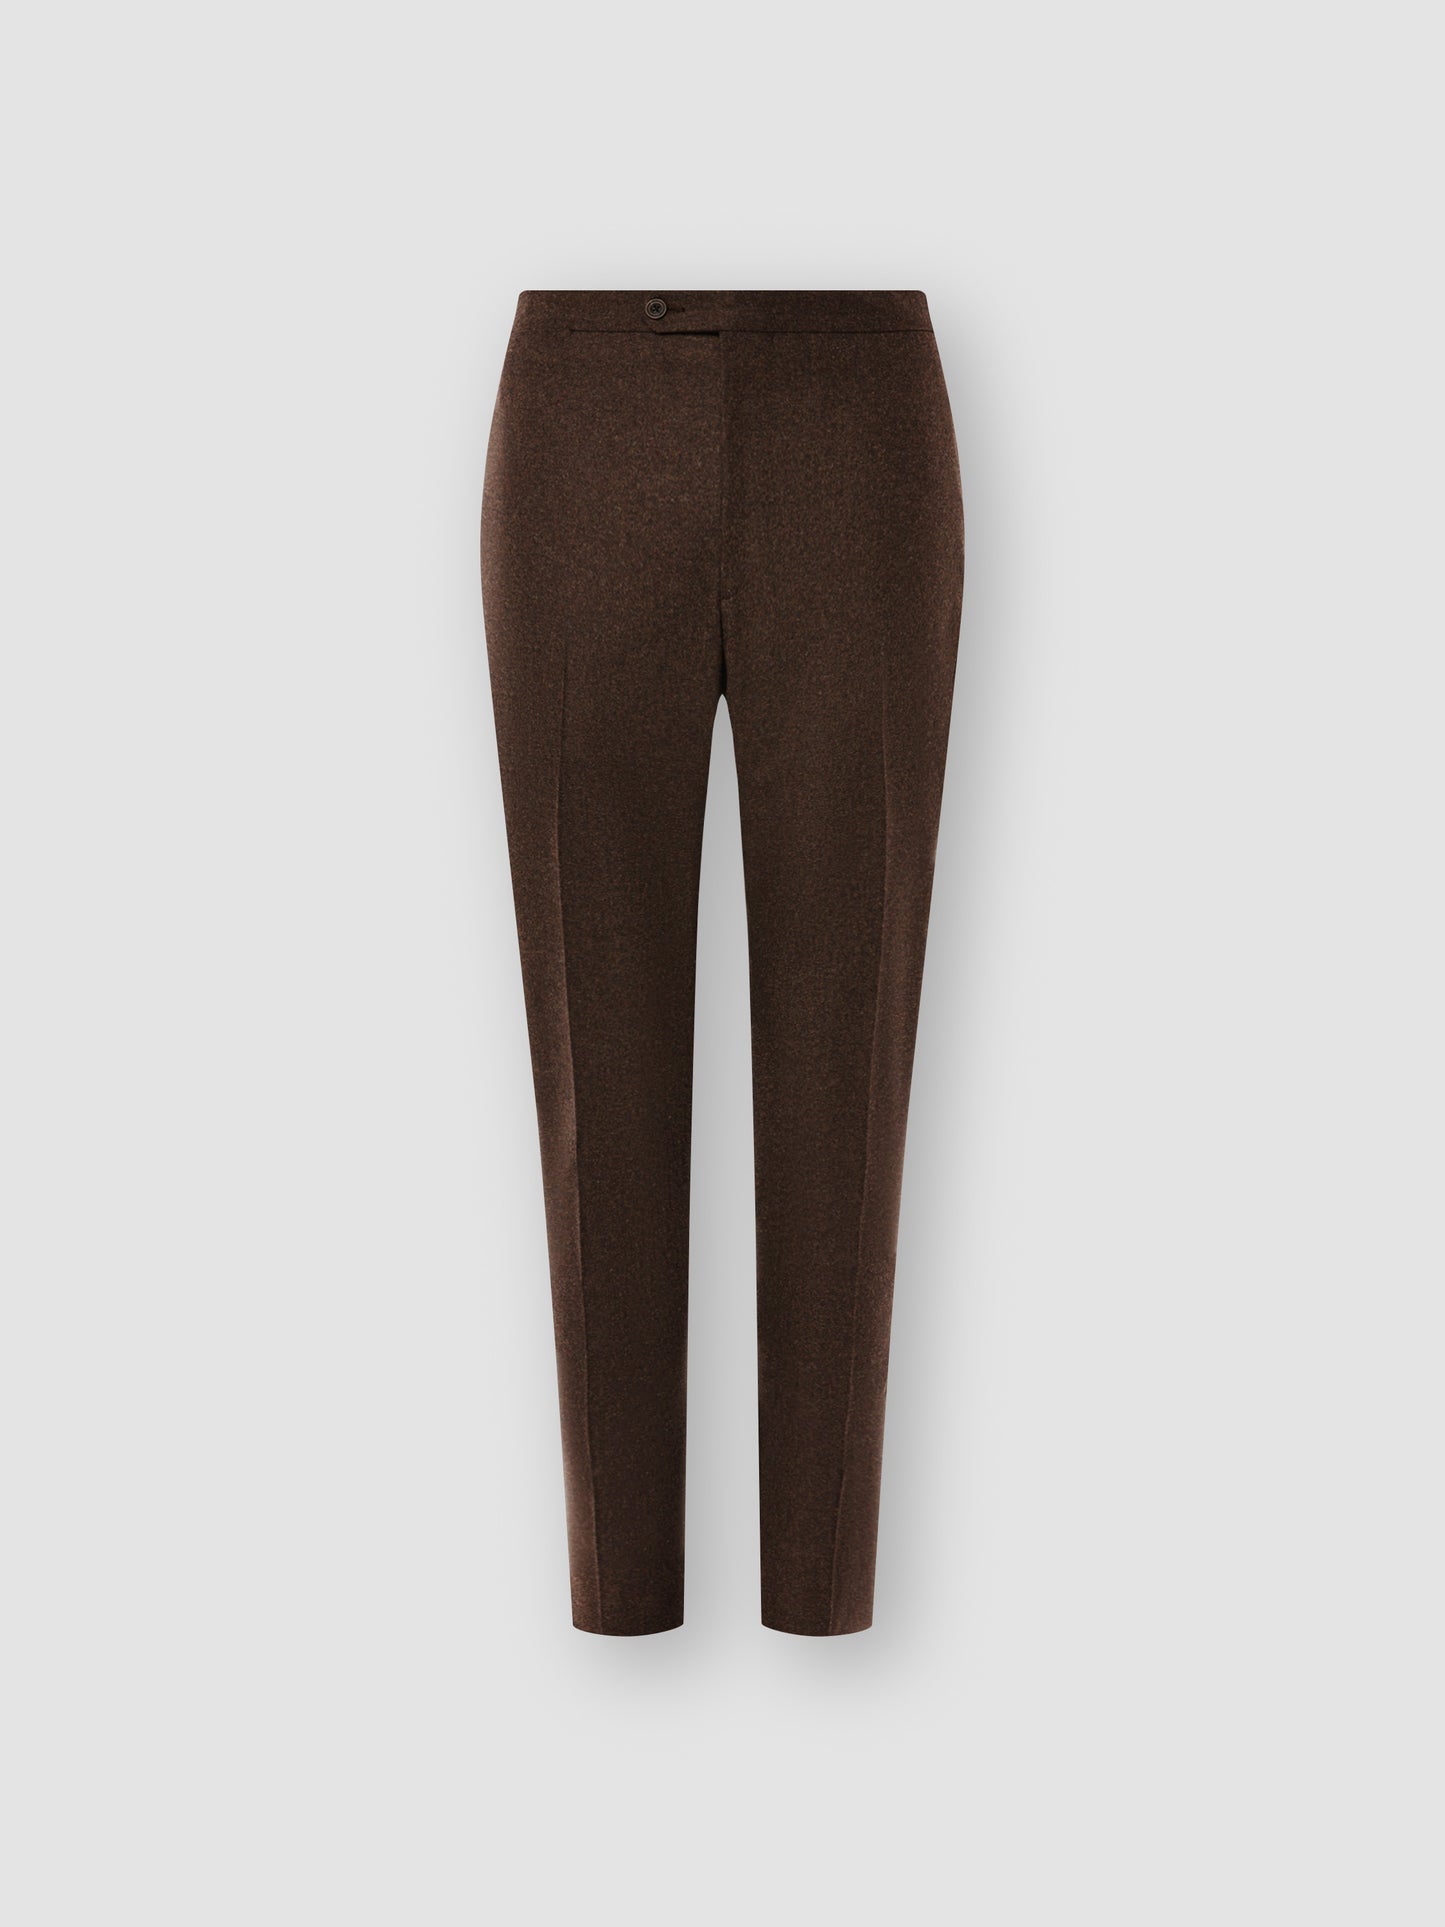 Wool Single Breasted Patch Pocket Suit Dark Brown Trouser Product Image